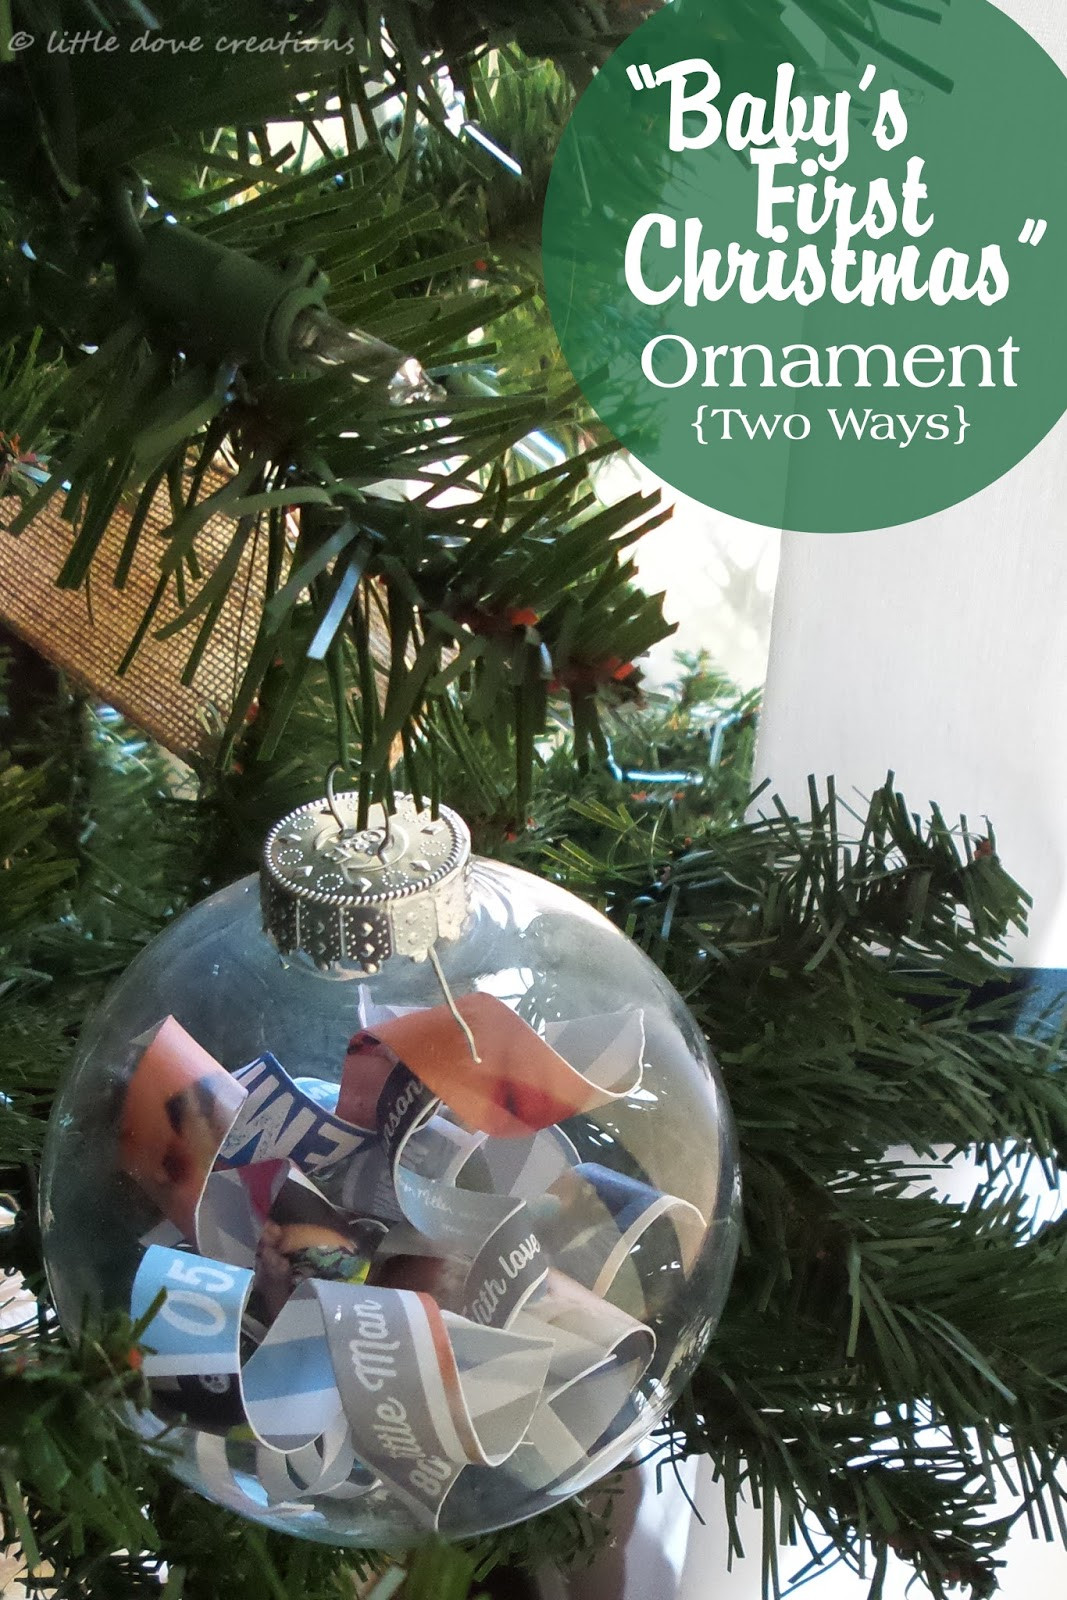 DIY Baby First Christmas Ornament
 diy "baby s first Christmas" ornaments Little Dove Blog